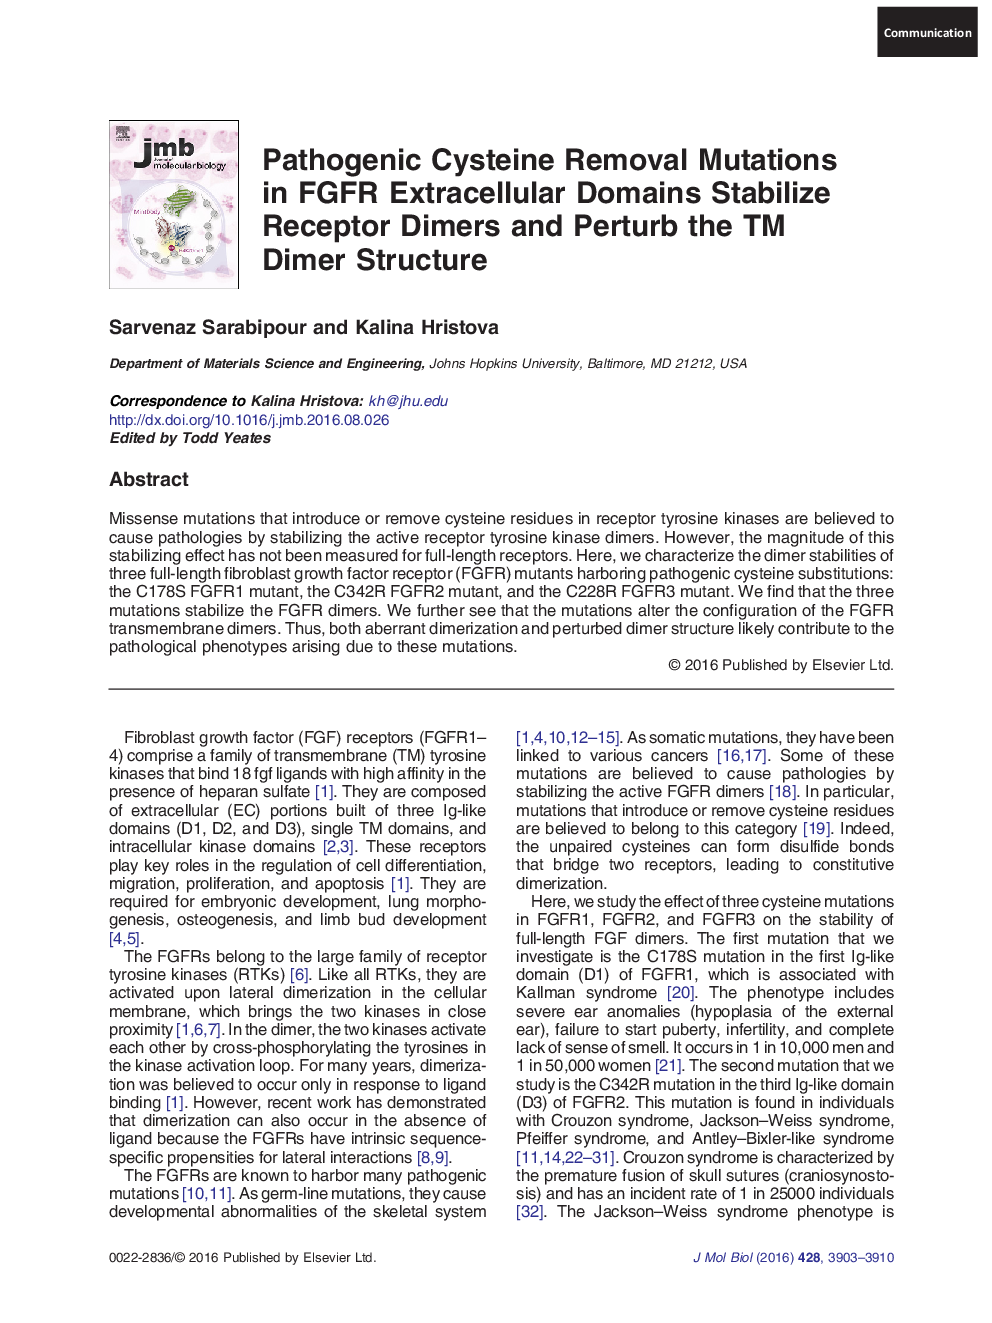 CommunicationsPathogenic Cysteine Removal Mutations in FGFR Extracellular Domains Stabilize Receptor Dimers and Perturb the TM Dimer Structure